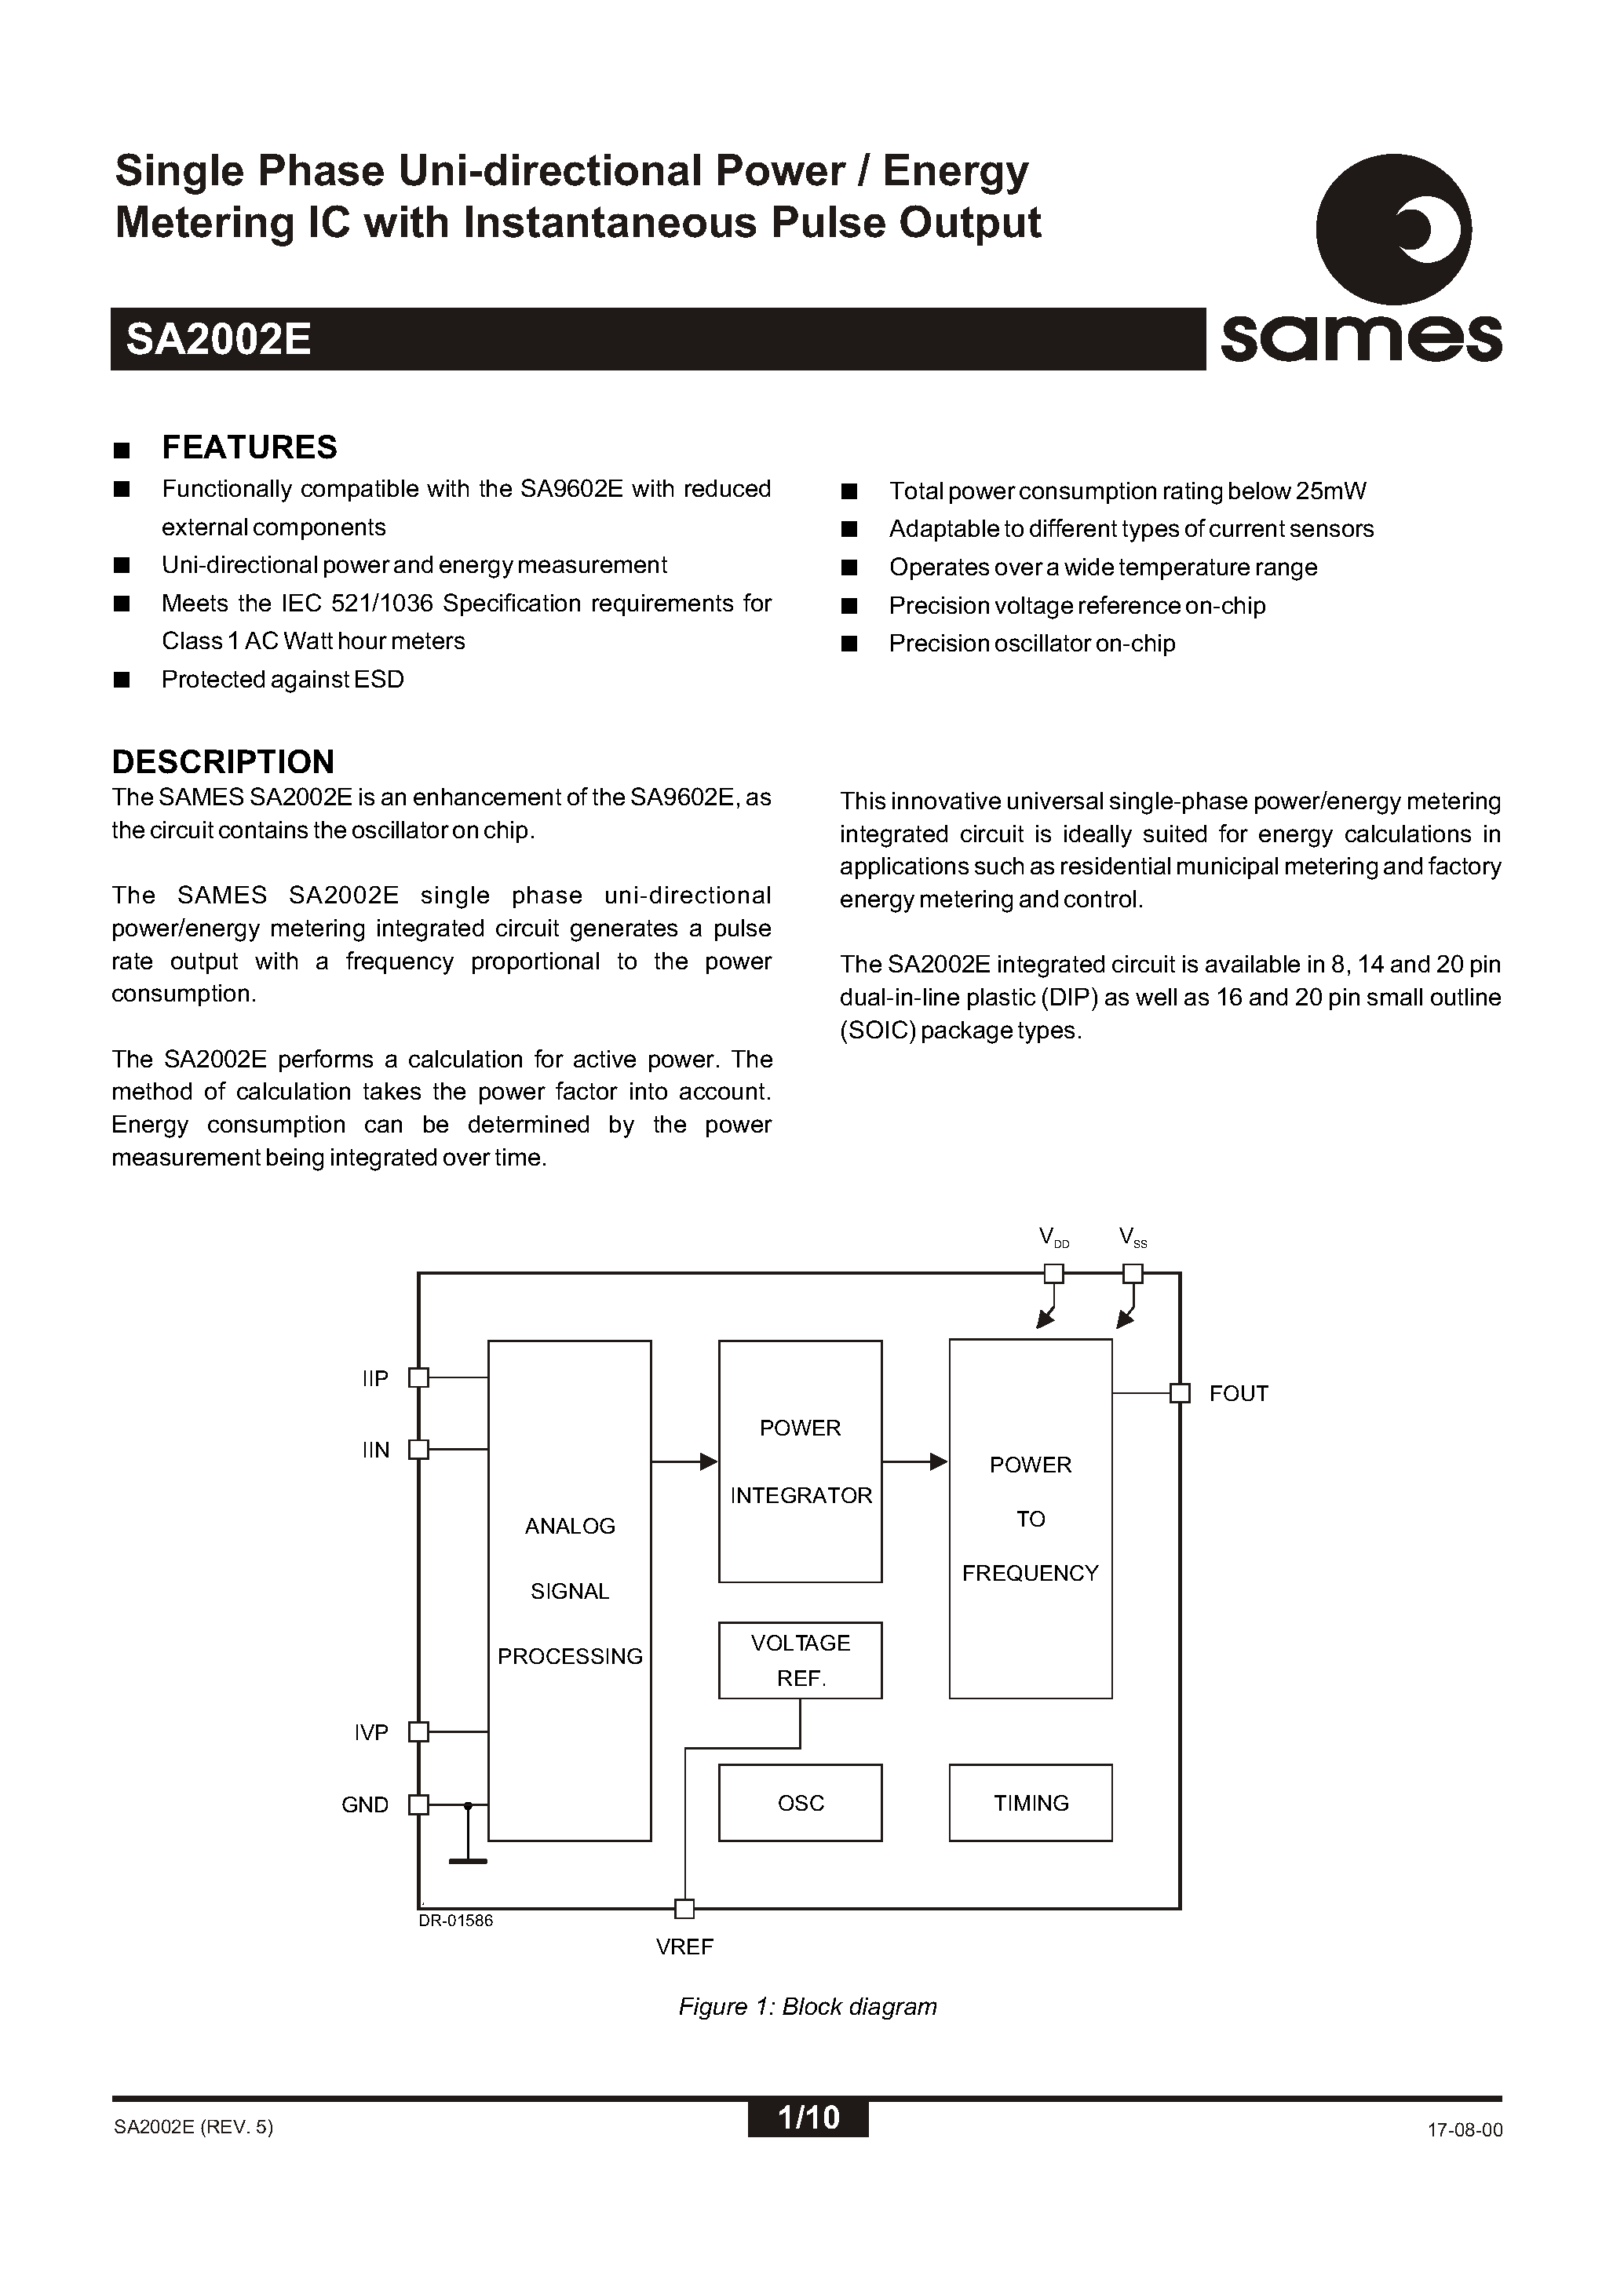 Даташит SA2002ESA - Single Phase Uni-directional Power / Energy Metering IC with Instantaneous Pulse Output страница 1